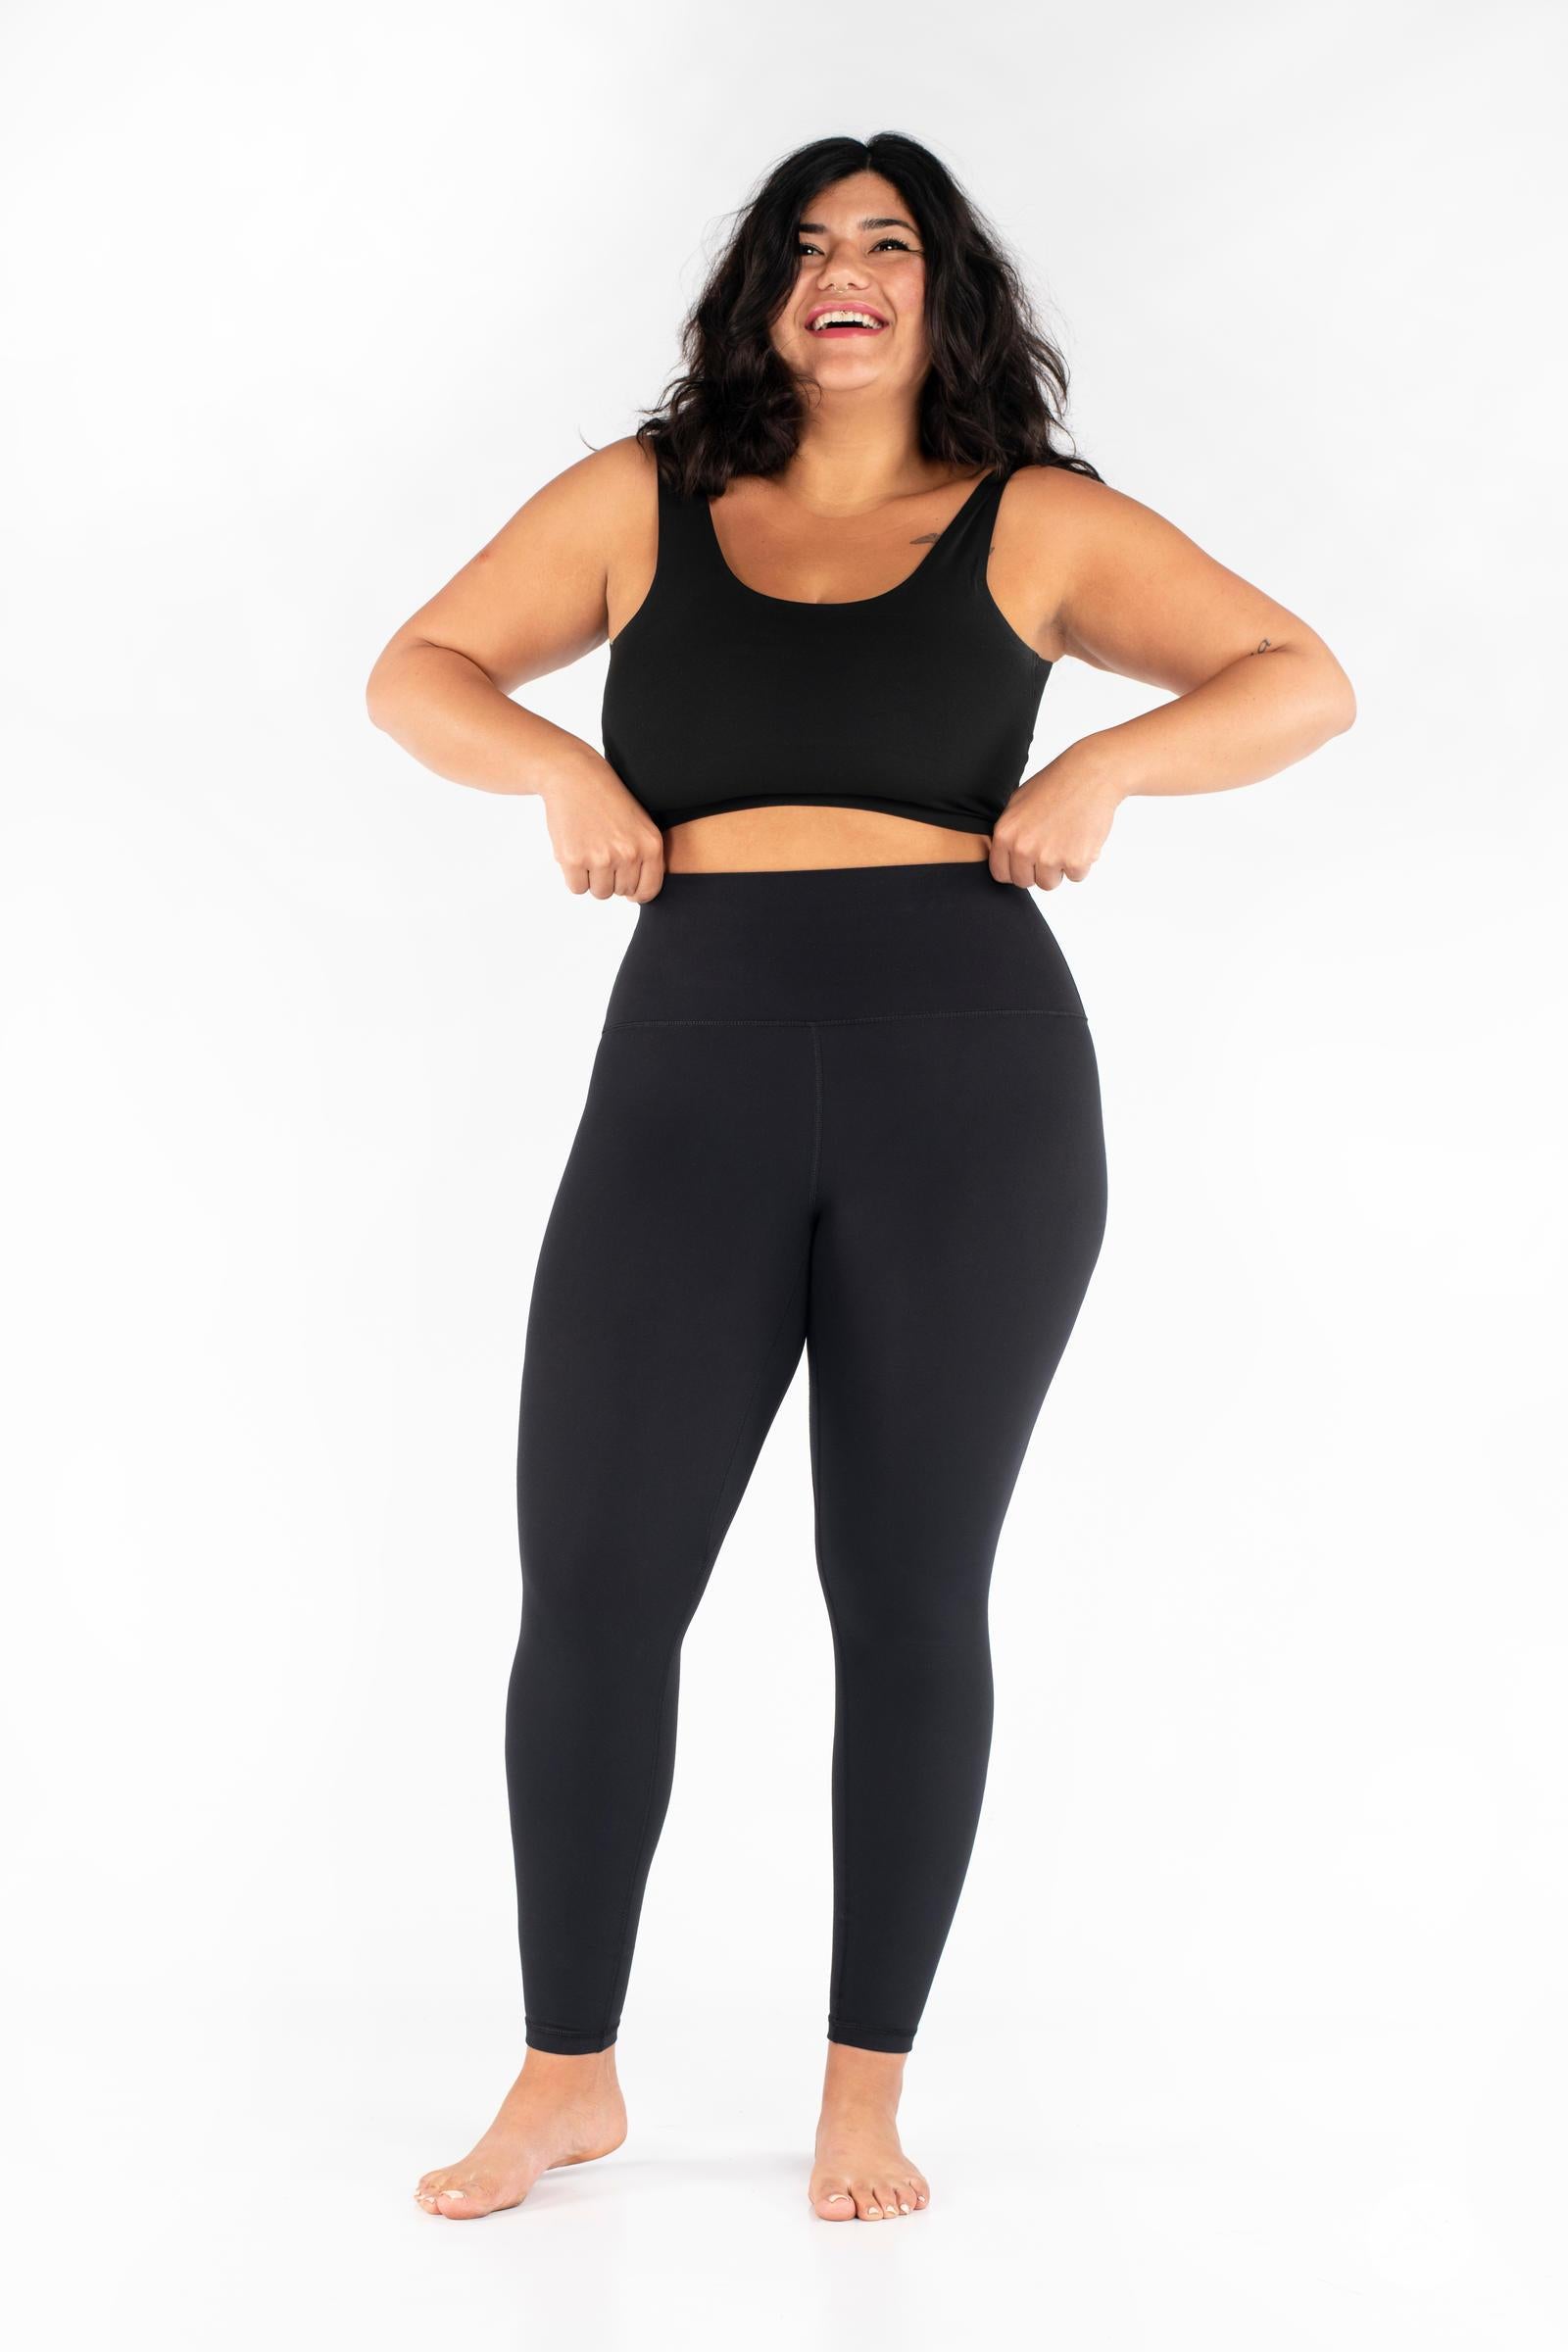 Yelete Ready for Action Full Size Ankle Cutout Active Leggings in Black:  Black 2XL